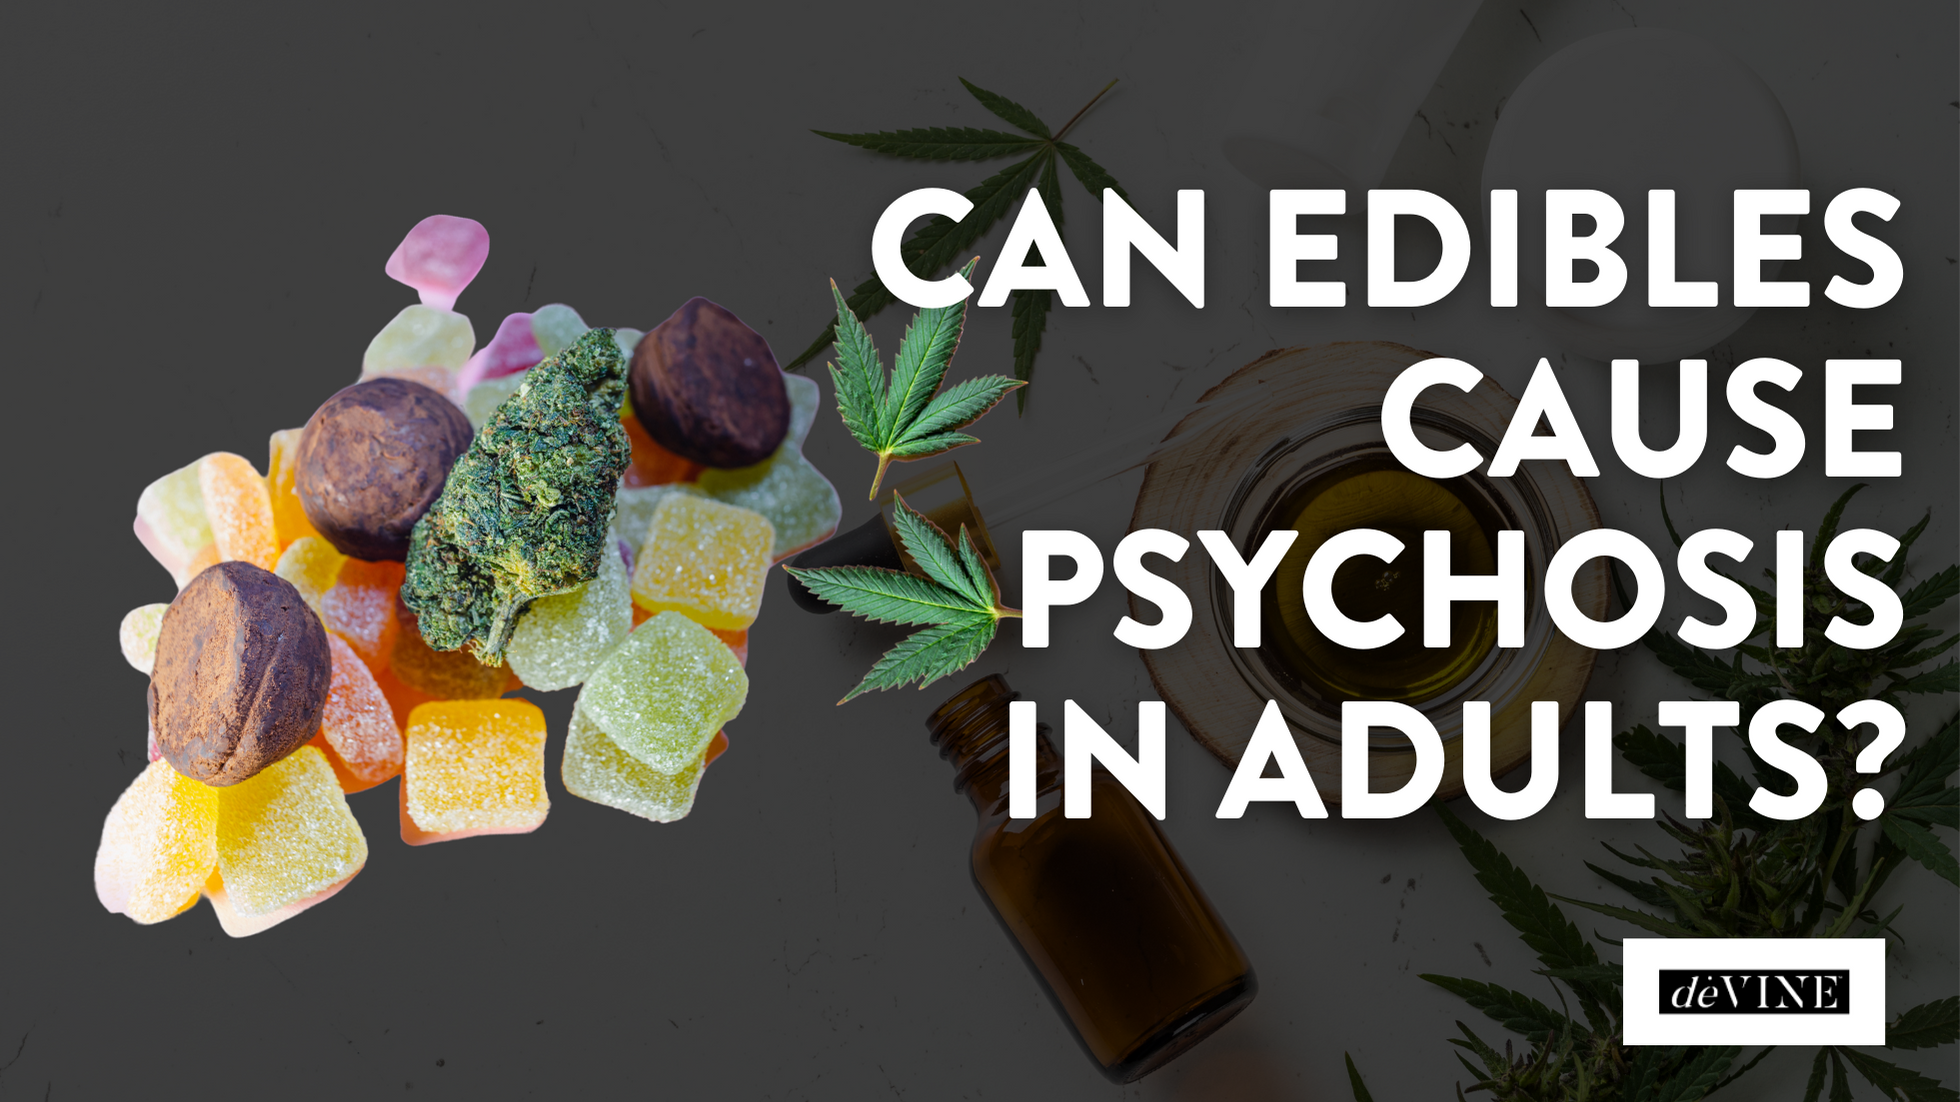 Can Edibles Cause Psychosis in Adults?